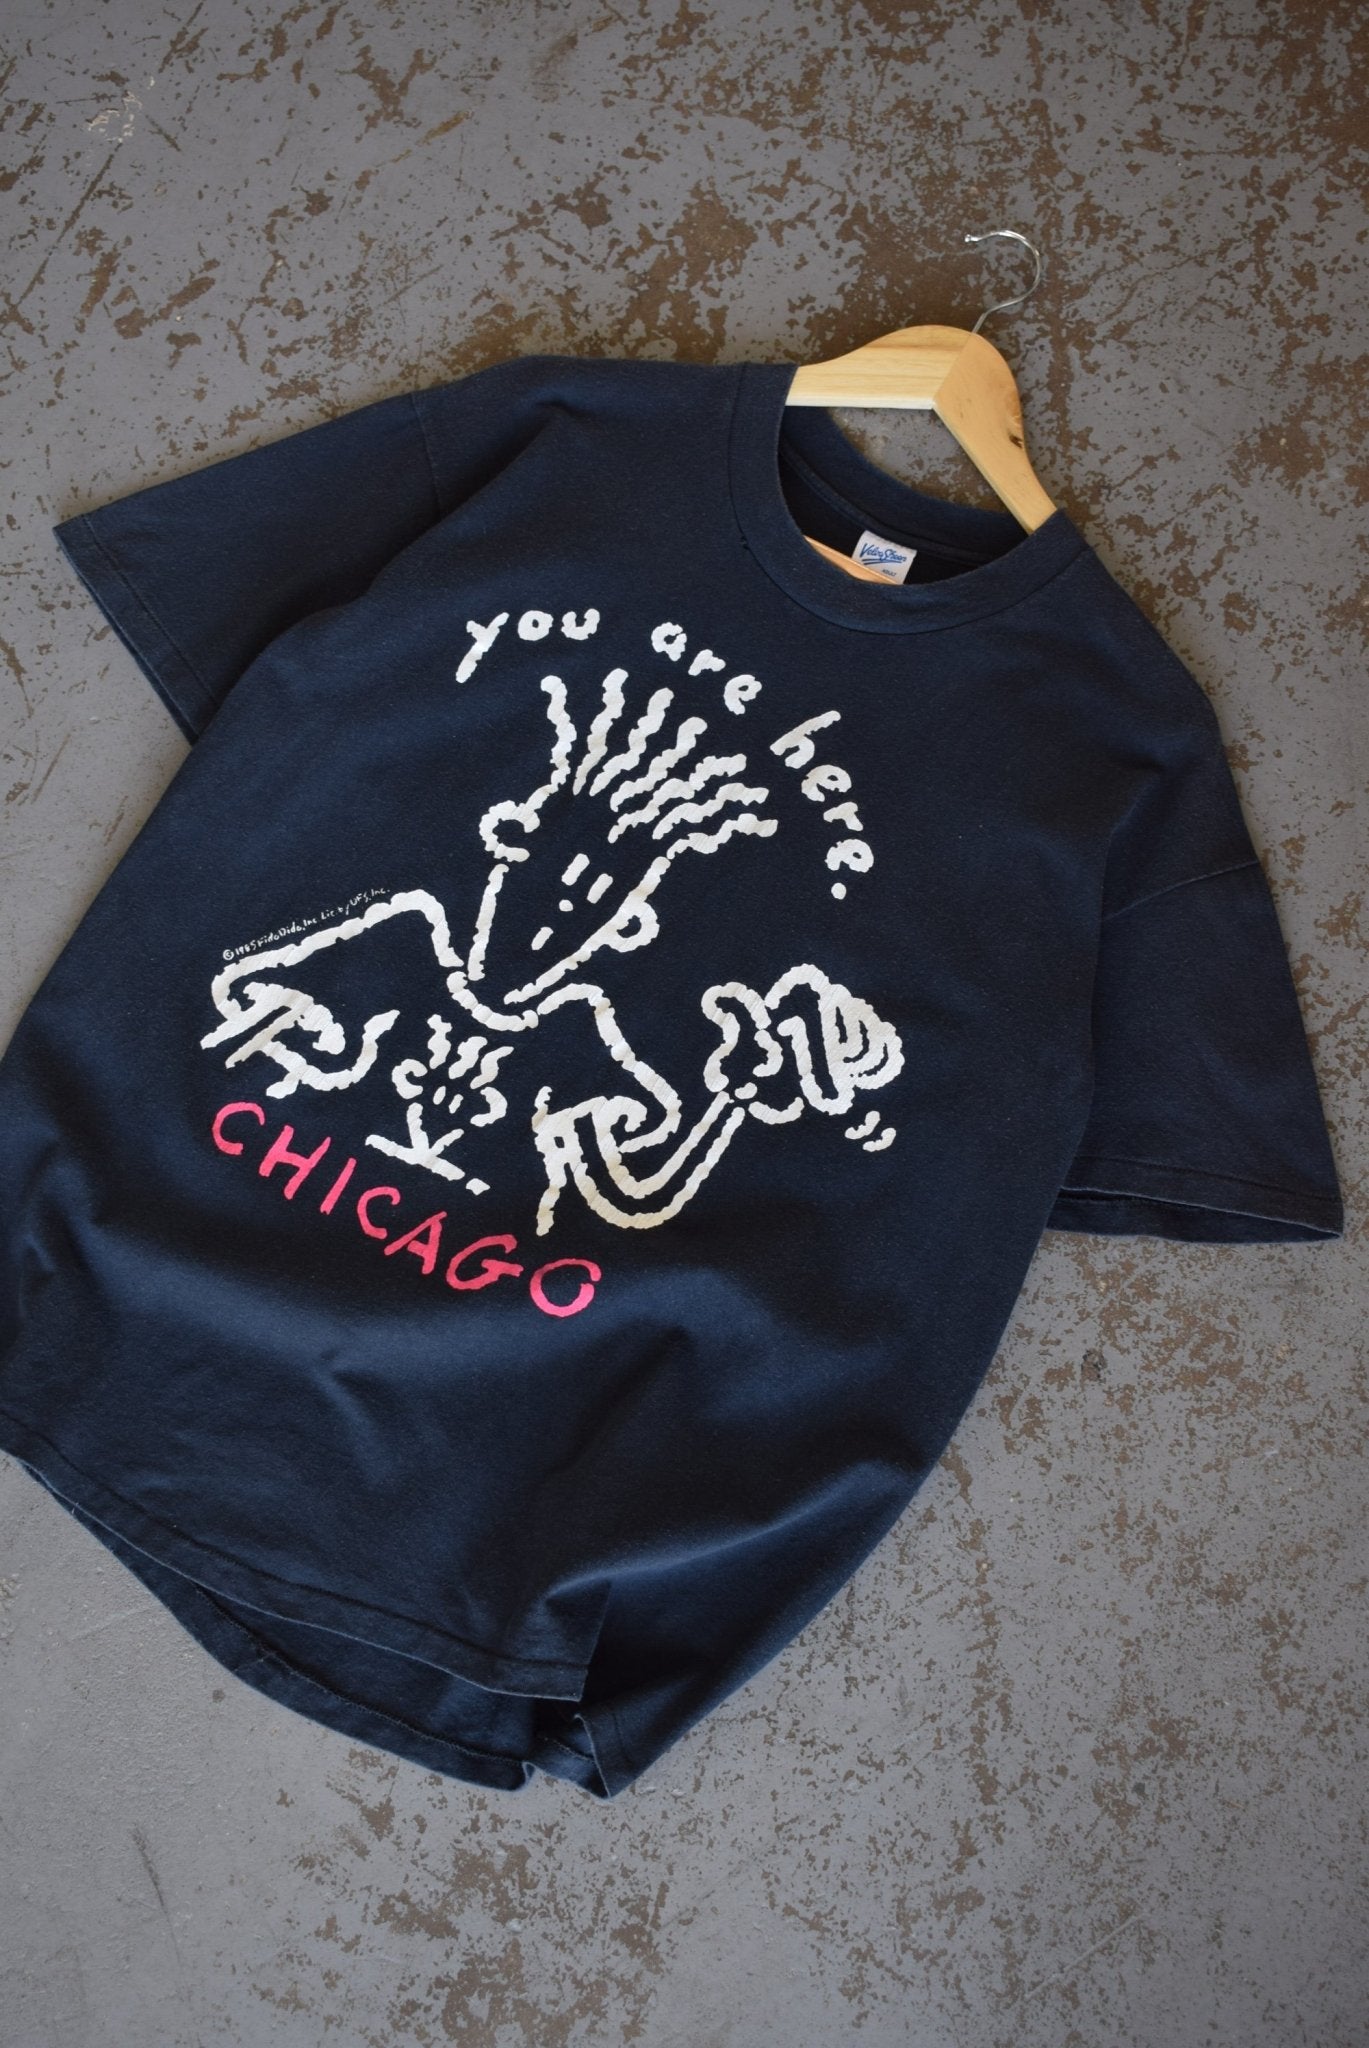 Vintage 1985 Chicago 'You Are Here' Tee (M) - Retrospective Store